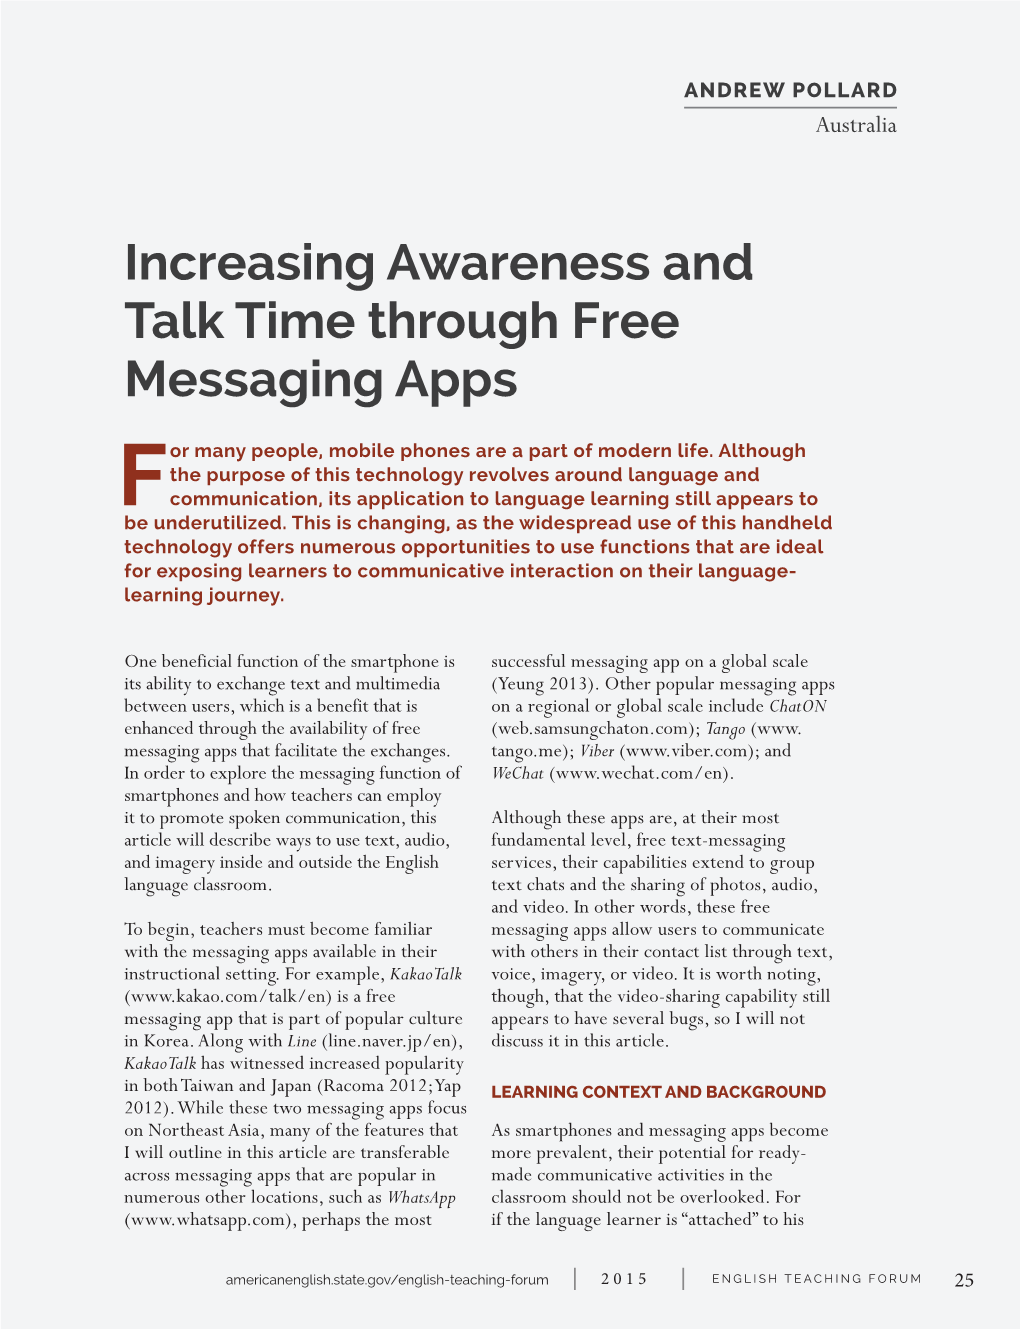 Increasing Awareness and Talk Time Through Free Messaging Apps